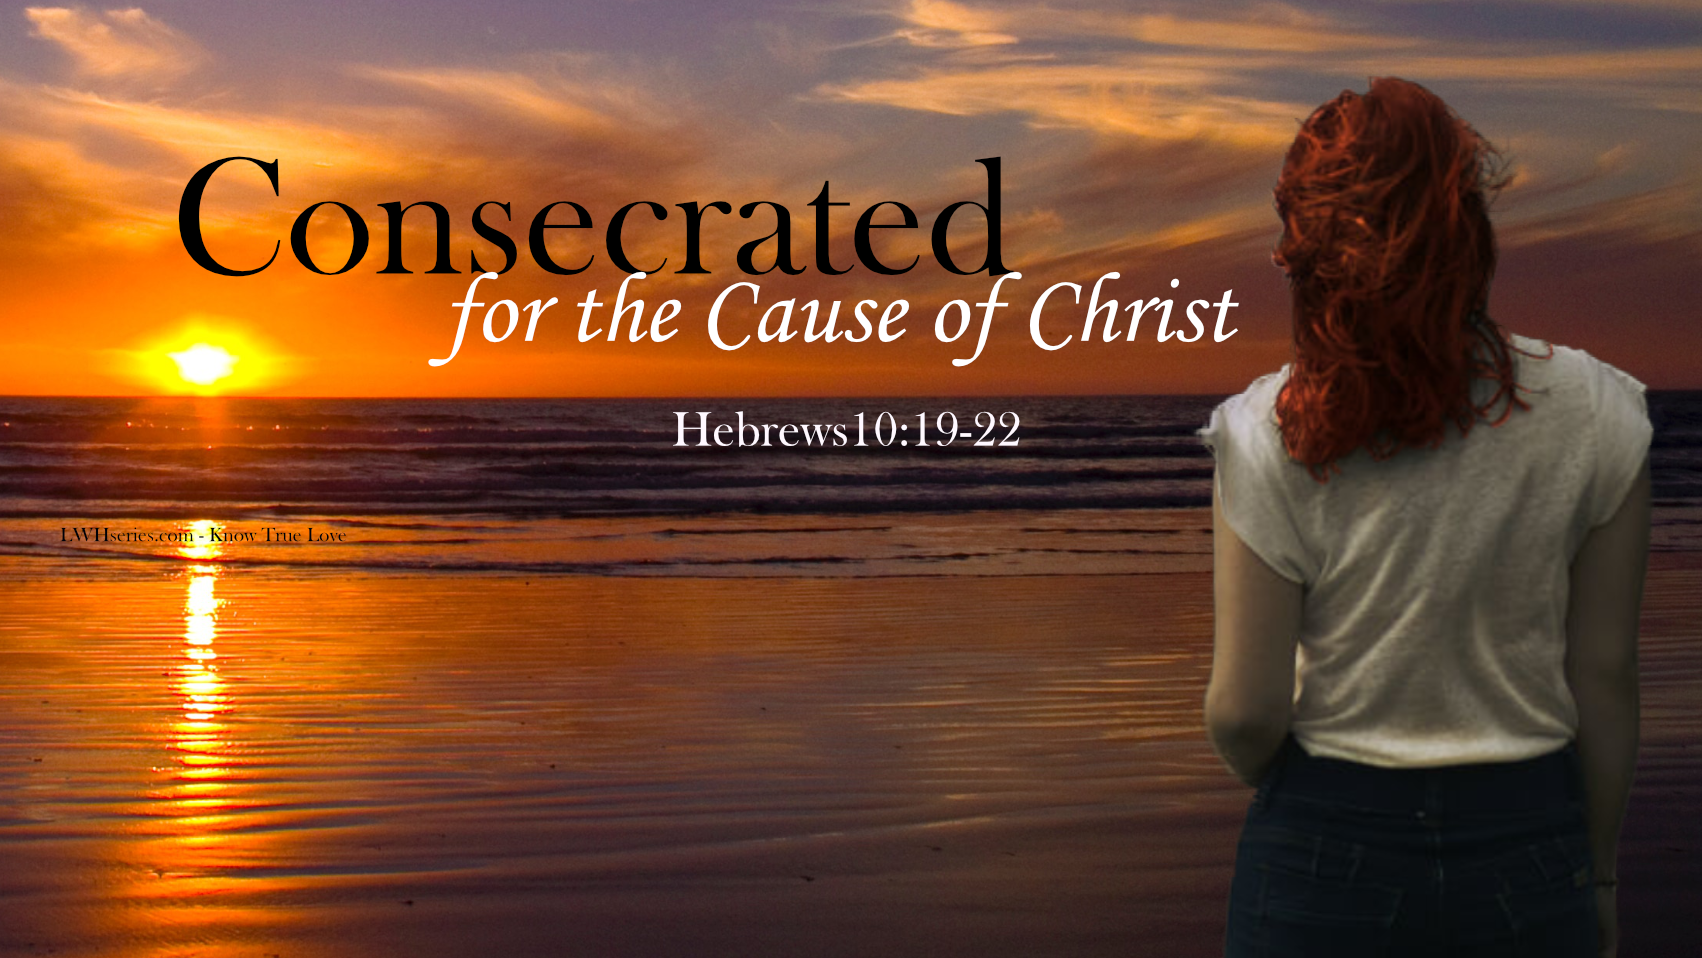 Theme 2019 - Consecrated for the Cause of Christ